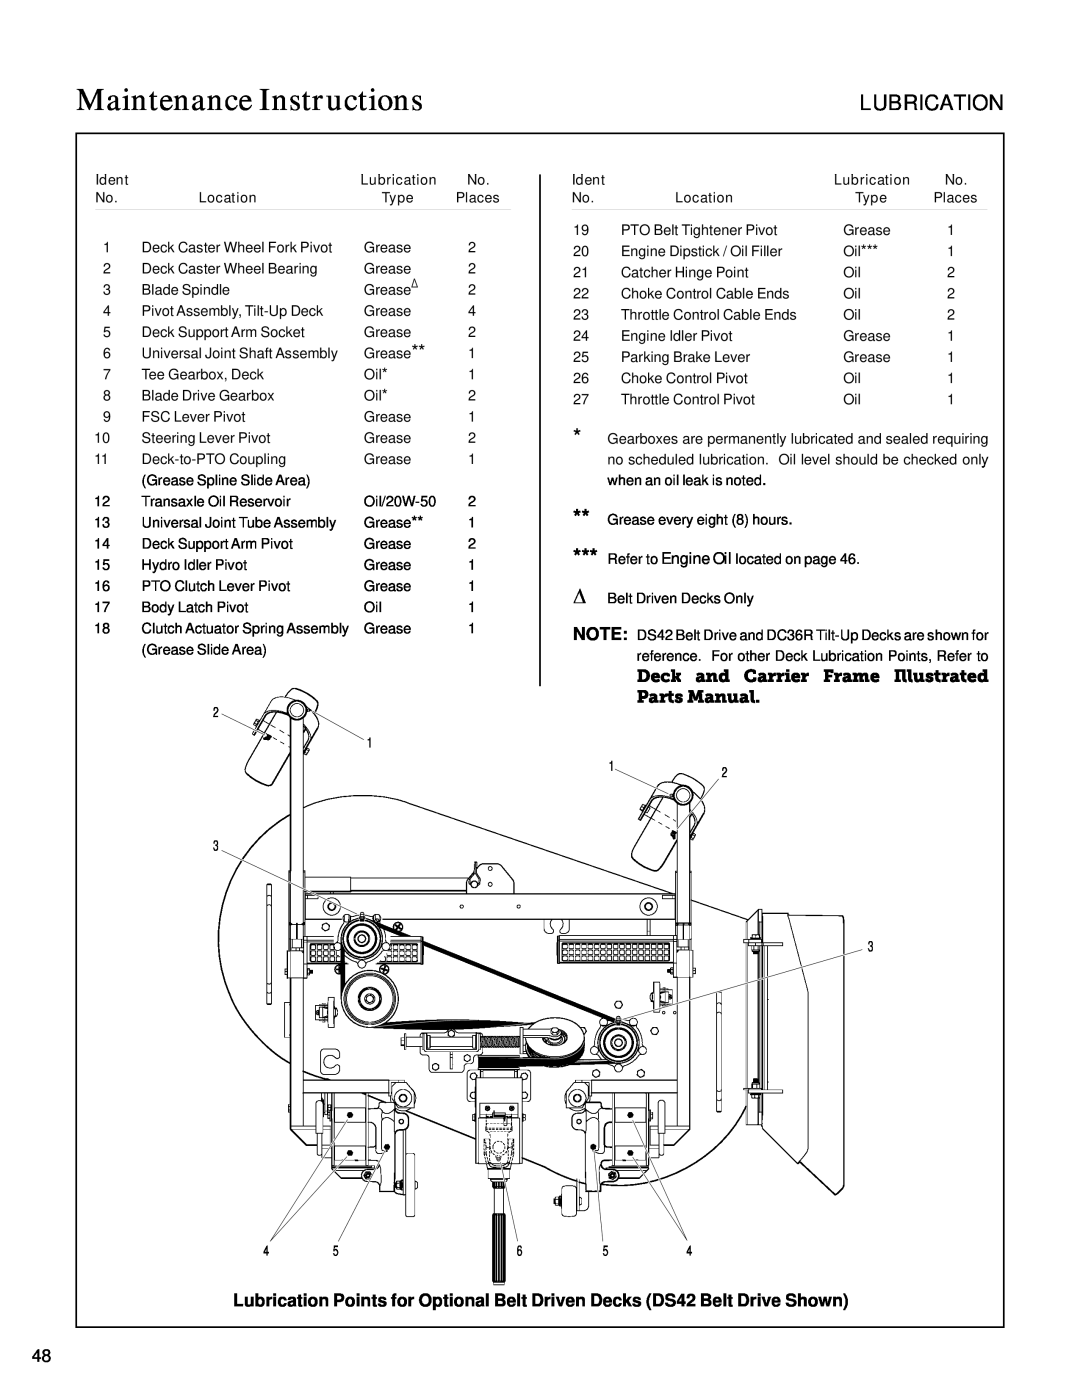 Walker S14 manual Deck and Carrier Frame Illustrated, Parts Manual, Maintenance Instructions, Lubrication 